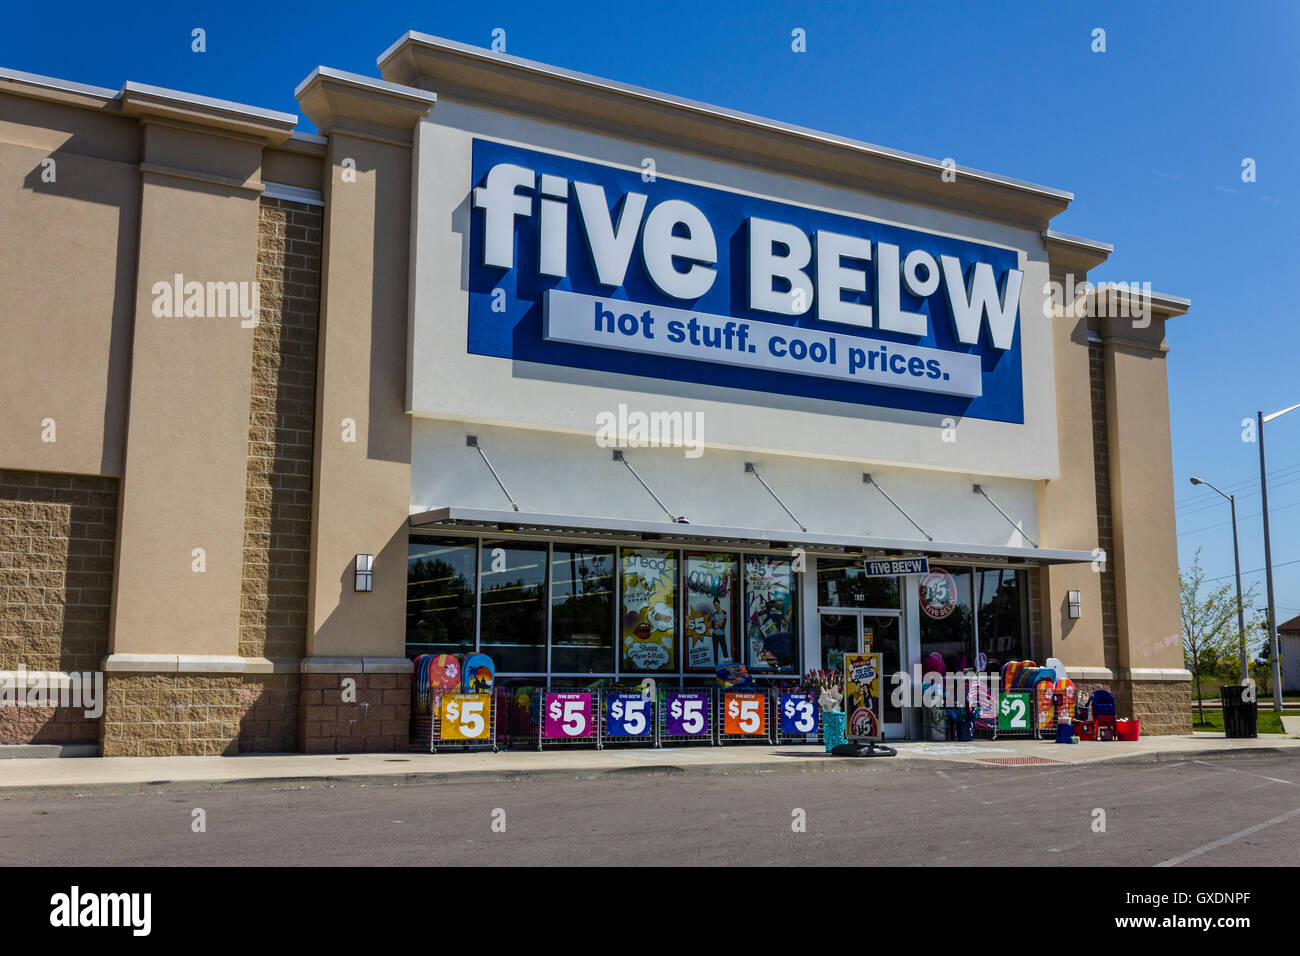 Muncie - Circa August 2016: Five Below Retail Store. Five Below is a chain that sells products that cost up to $5 VI Stock Photo